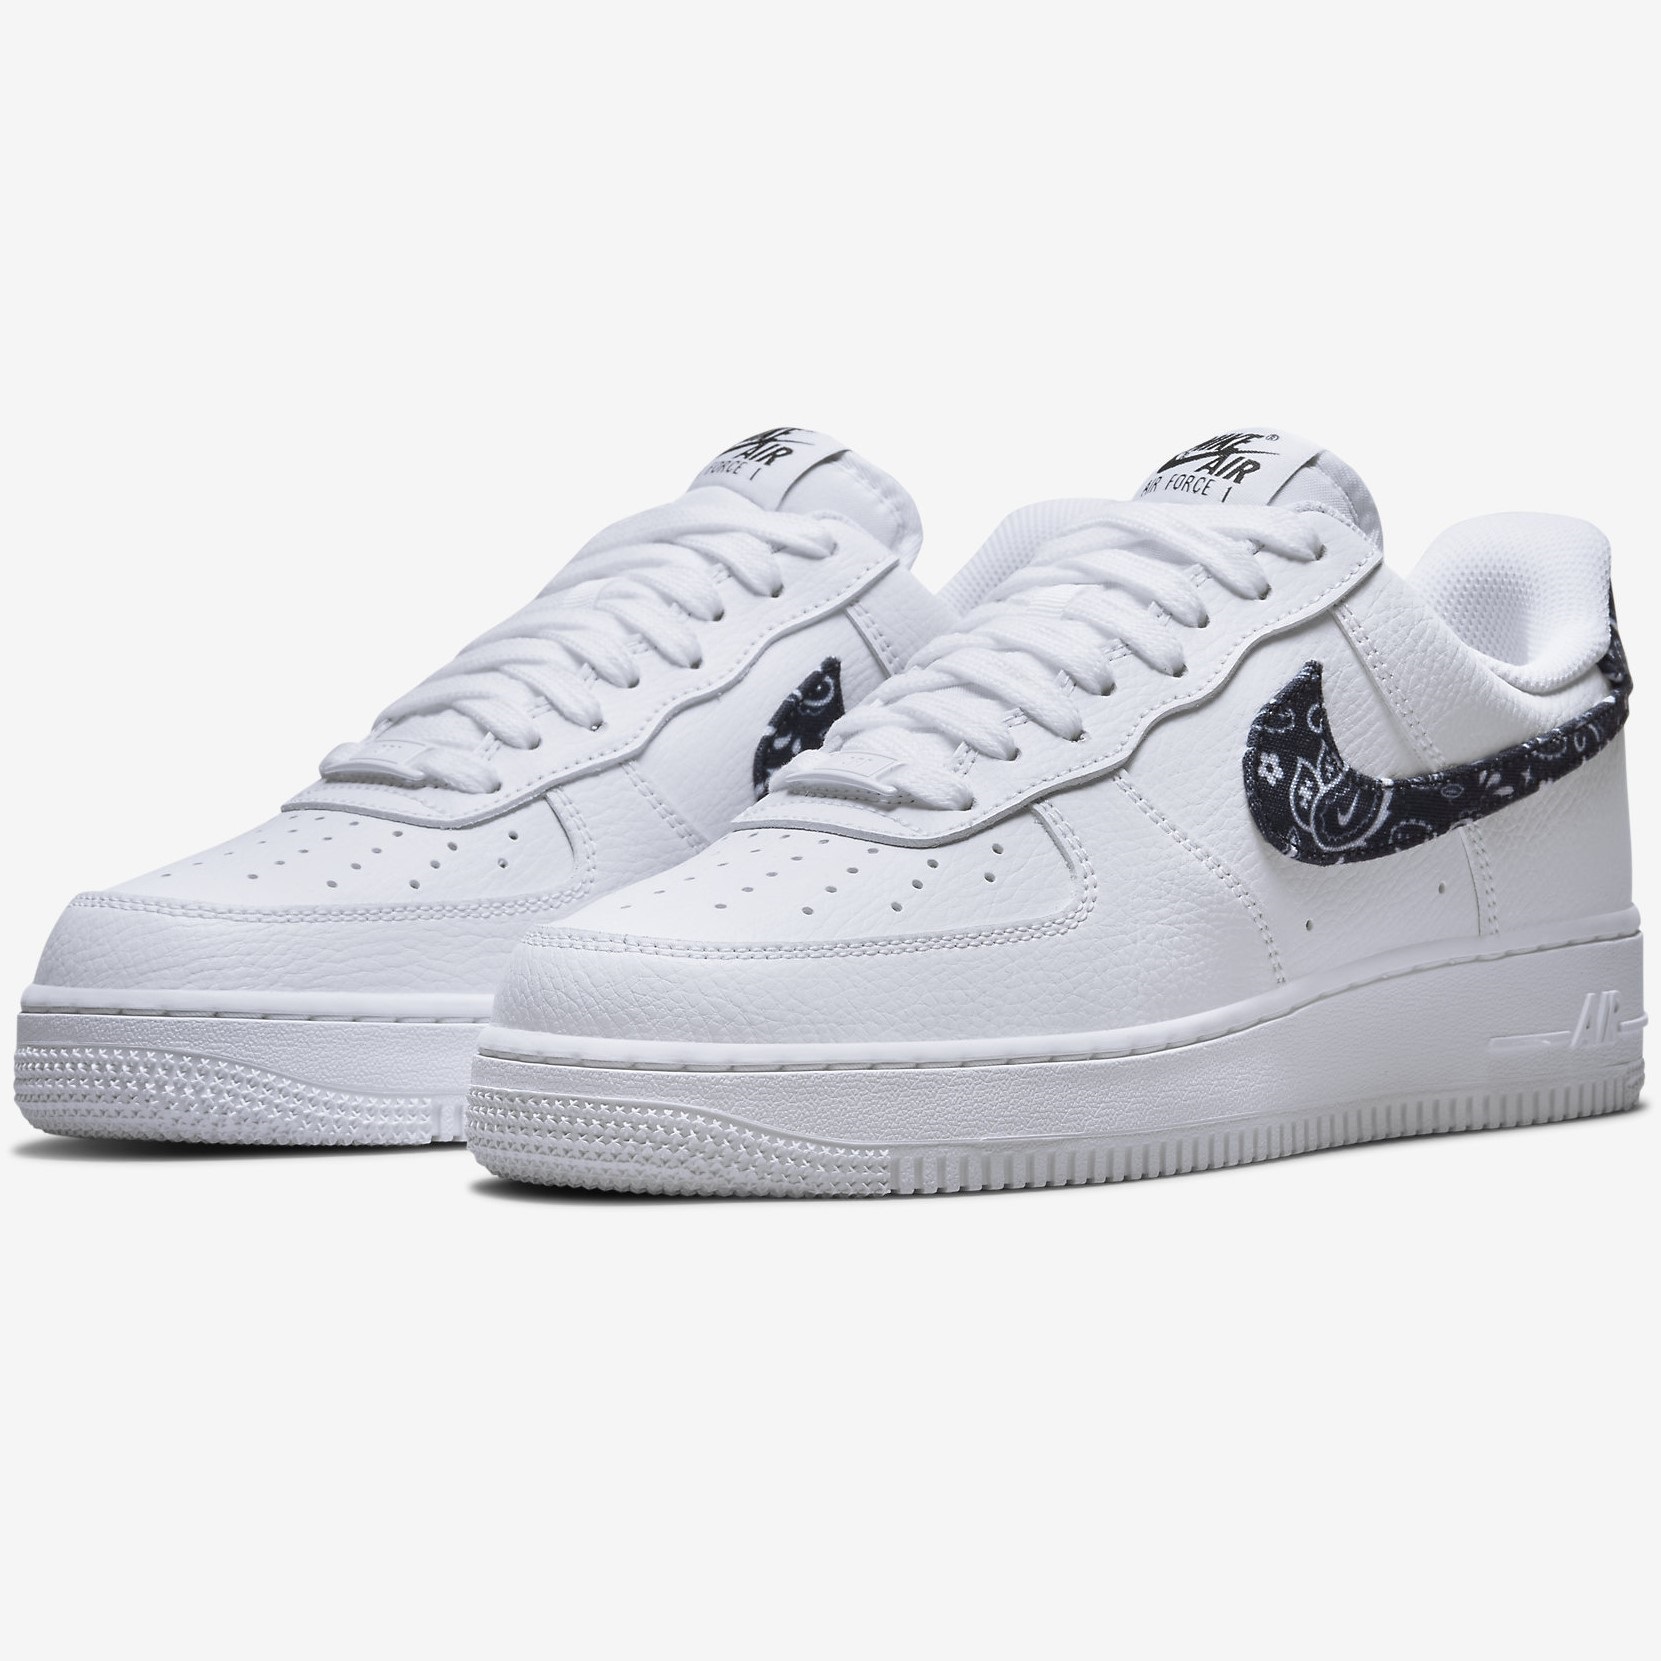 GIÀY THỂ THAO NIKE AIR FORCE 1 LOW 07 ESSENTIALS ´BLACK PAISLEY´ DH4406-101 7